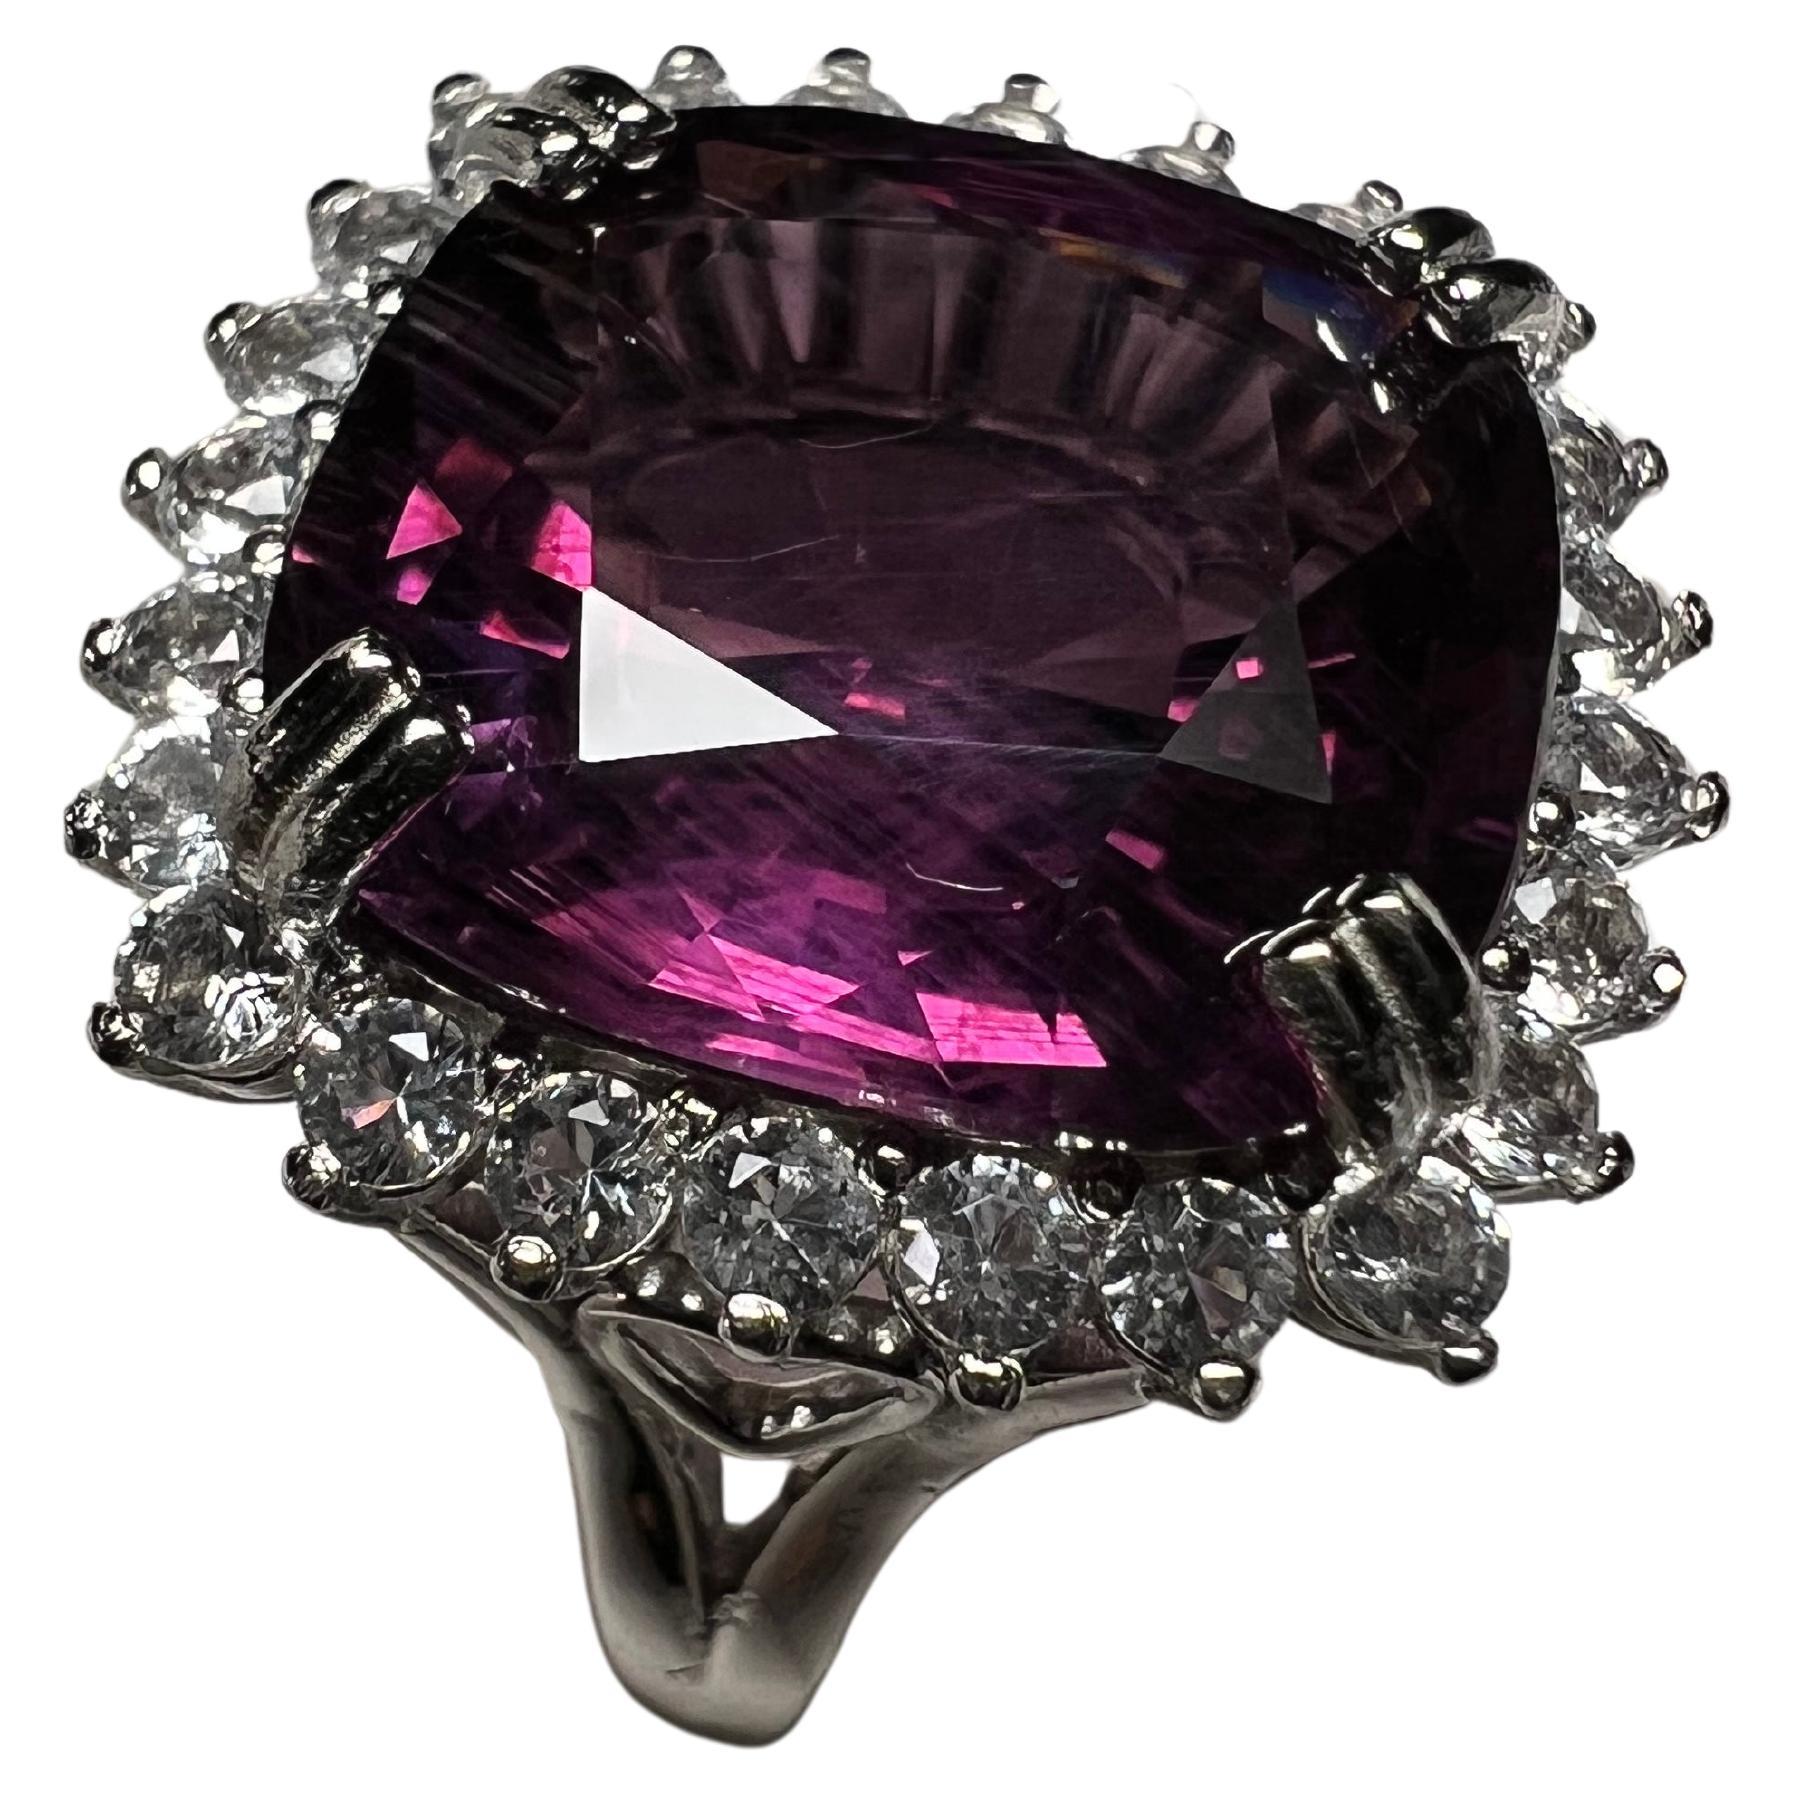 Rare 11.81 Carat Pink Purple Spinel Coctail Ring, Gemstone is GIA Certified